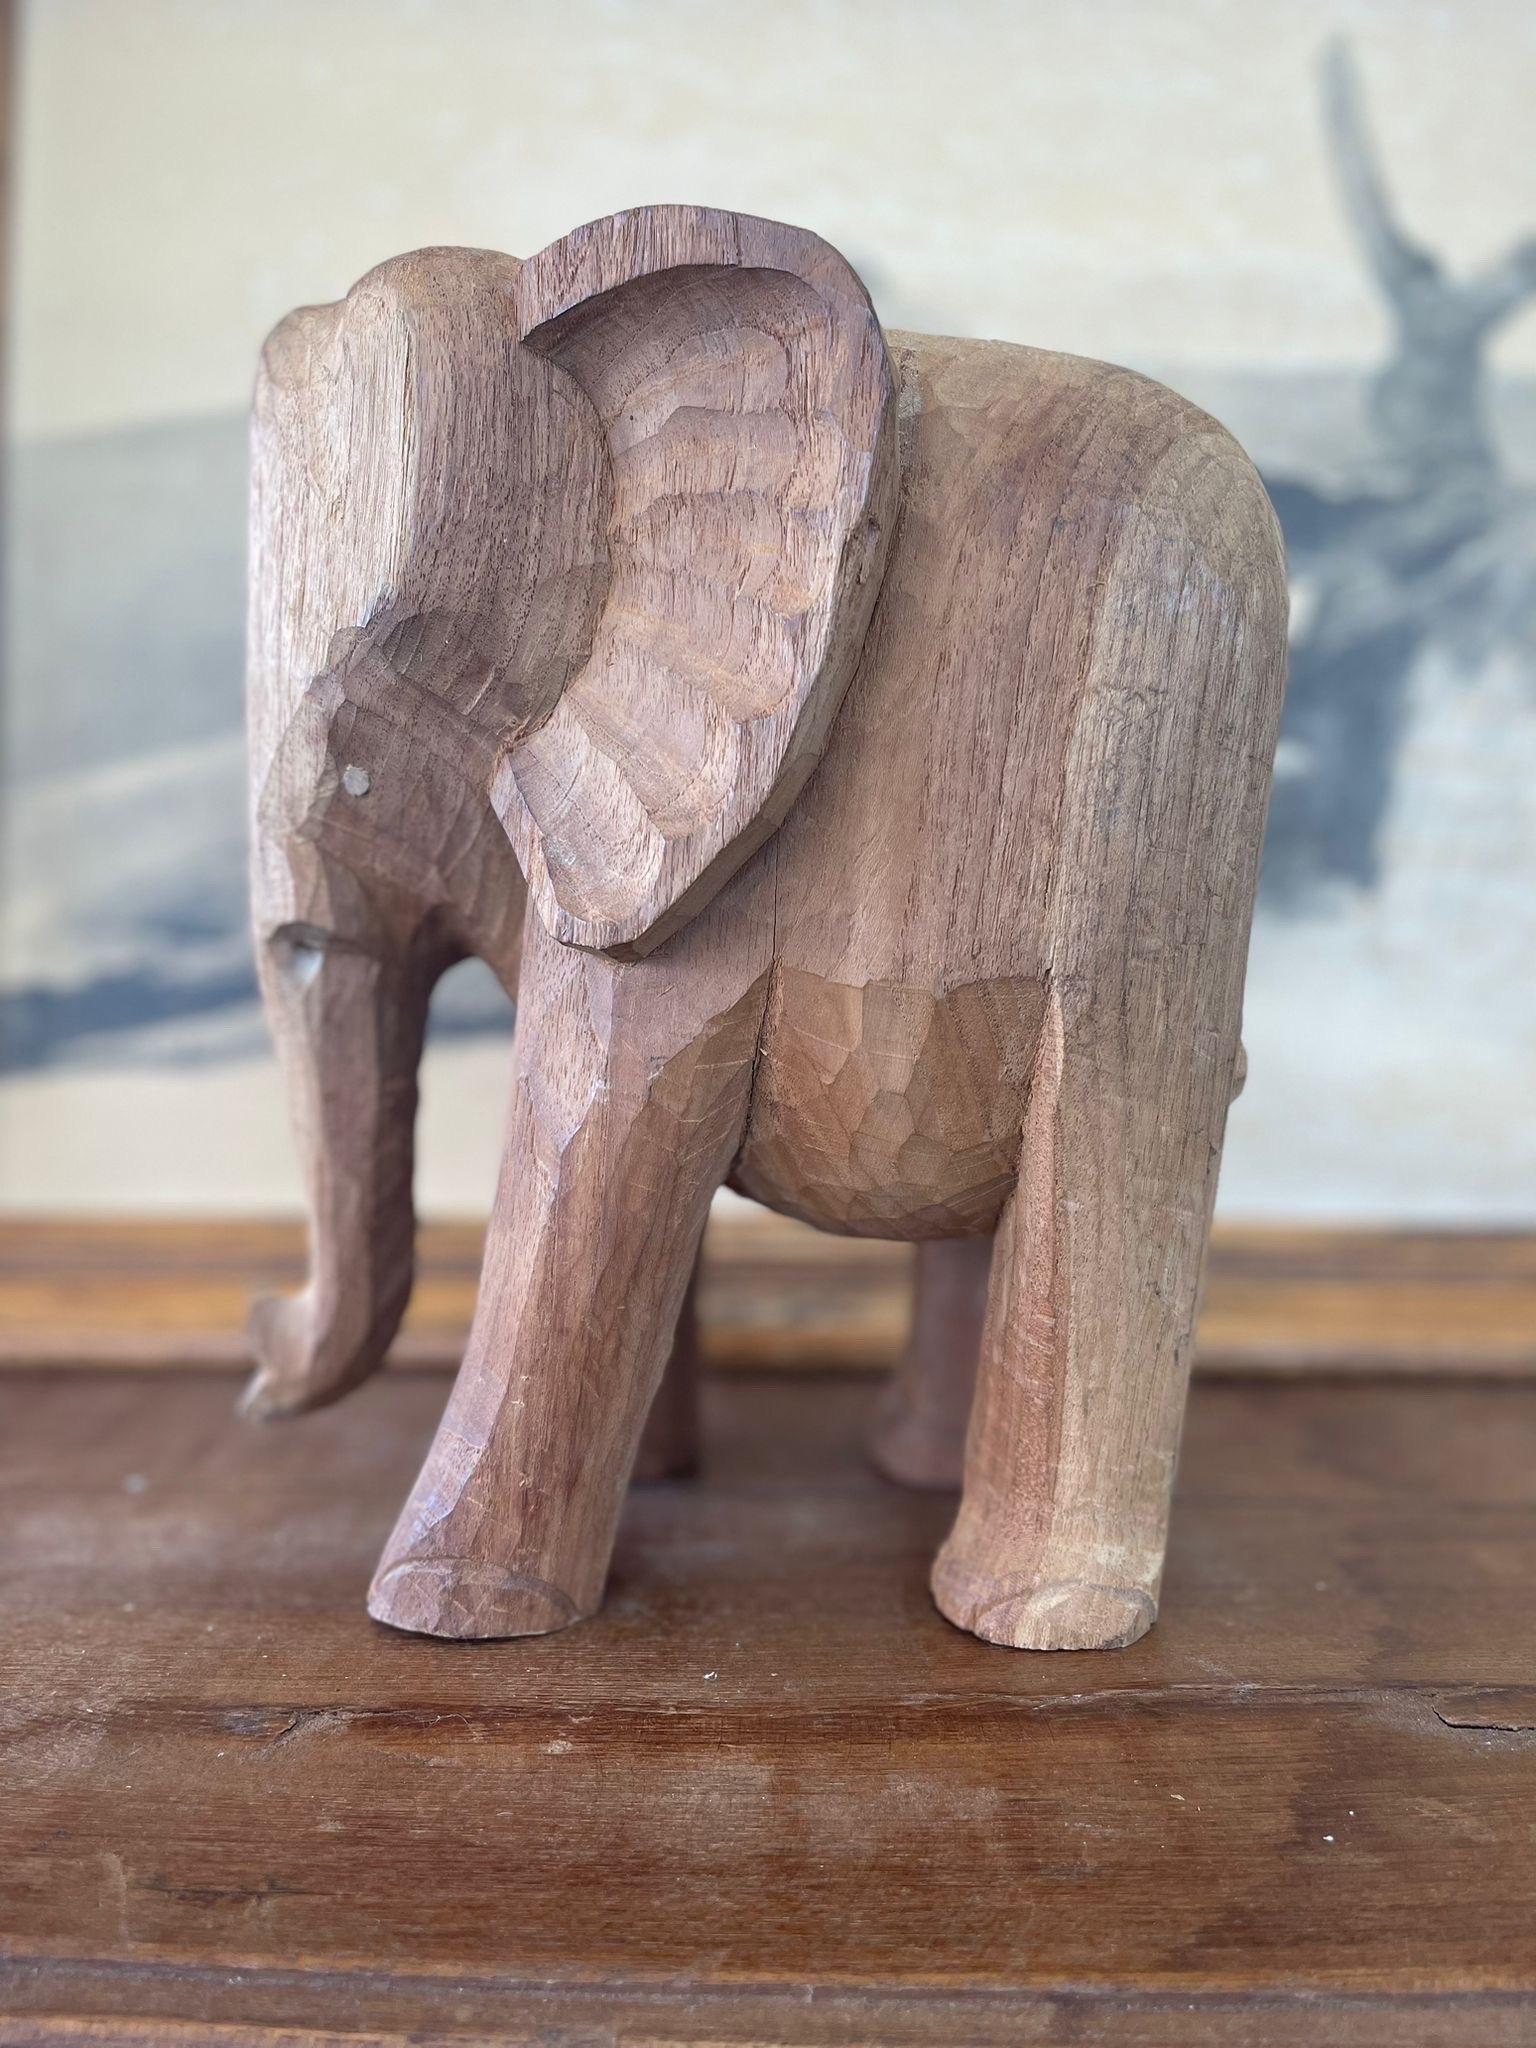 Antique Style Elephant Carving. Wear and Cracking Consistent With Age. Could be Used as Plant Stand.

Dimensions. 9 W ; 7 D ; 11 H